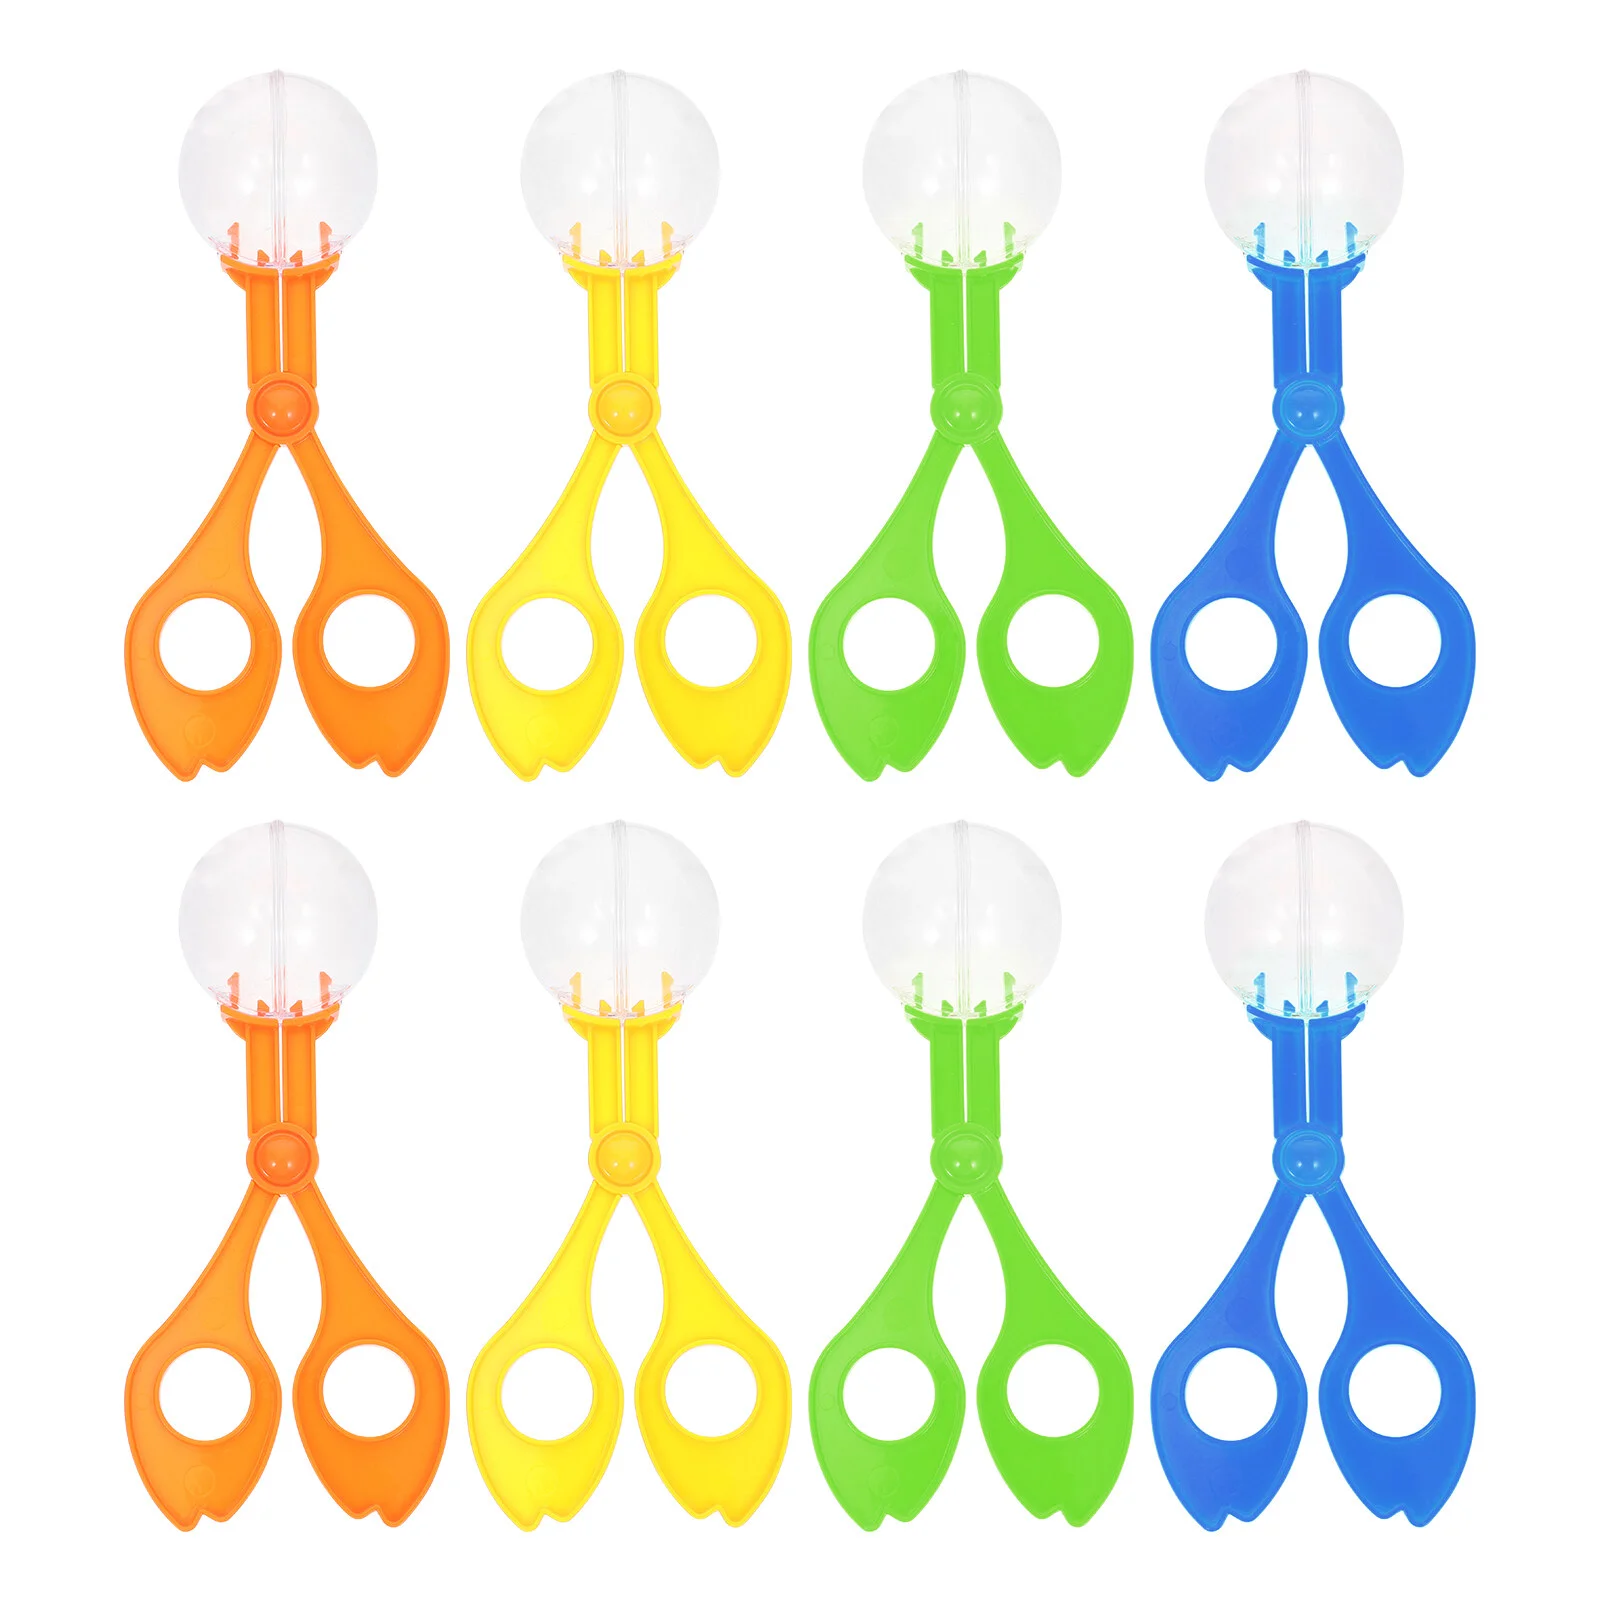 

8 Pcs Bug Trap Outdoor Toys Catcher Kid Used Scissors Container Practical Insect Trapping Kit Exploring Plastic Clamp Child